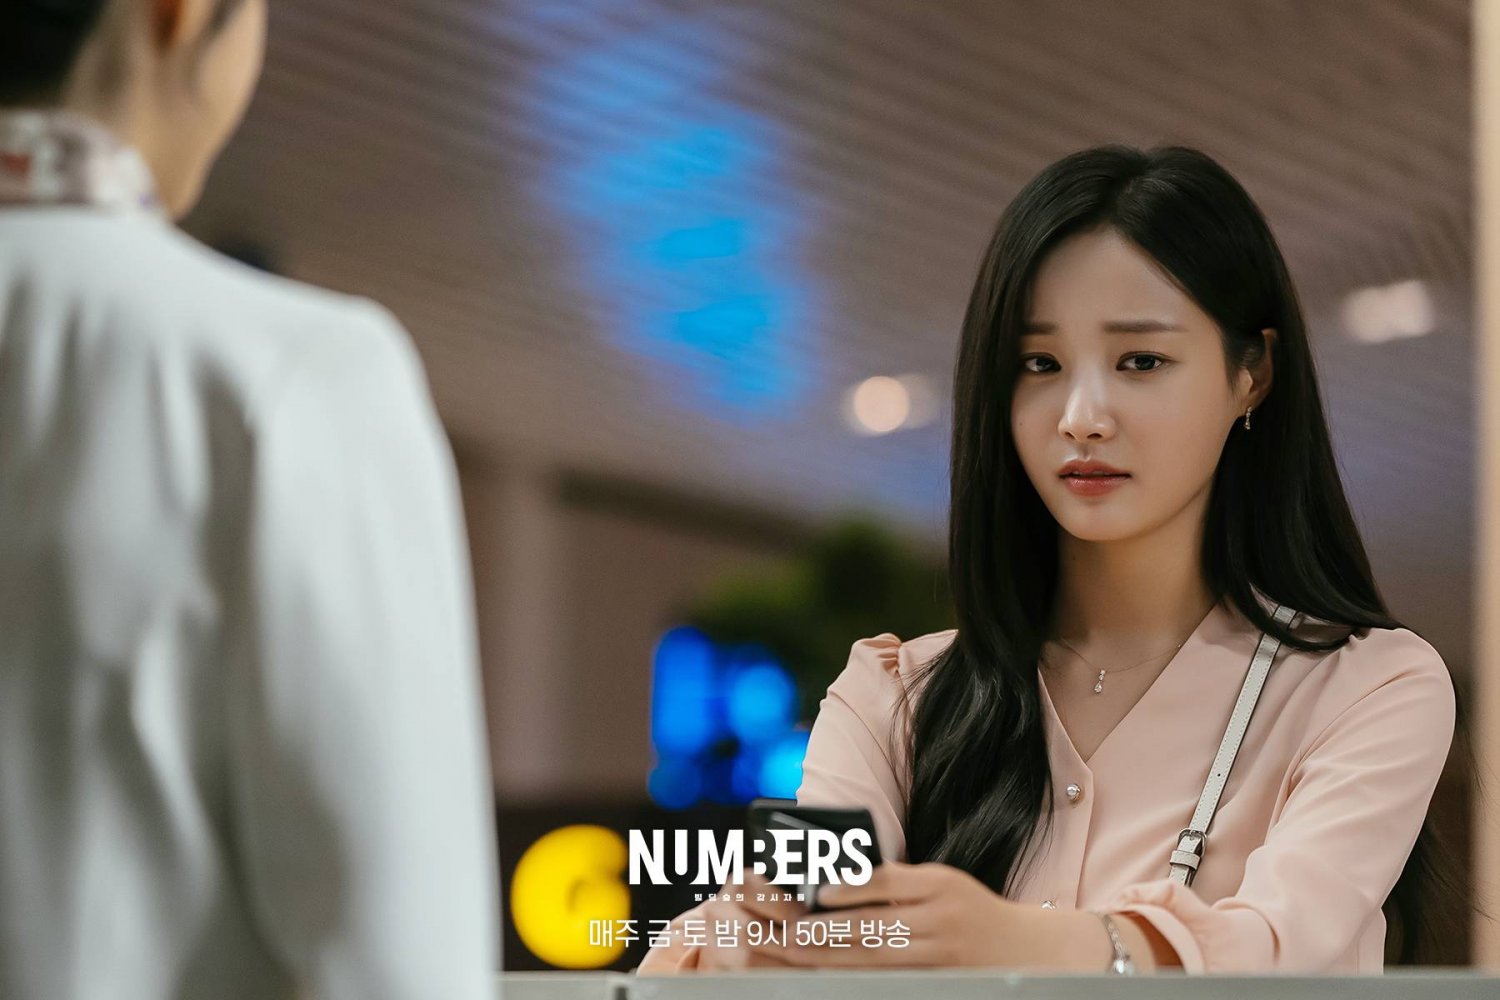 [Photos] New Stills Added for the Korean Drama 'Numbers' @ HanCinema